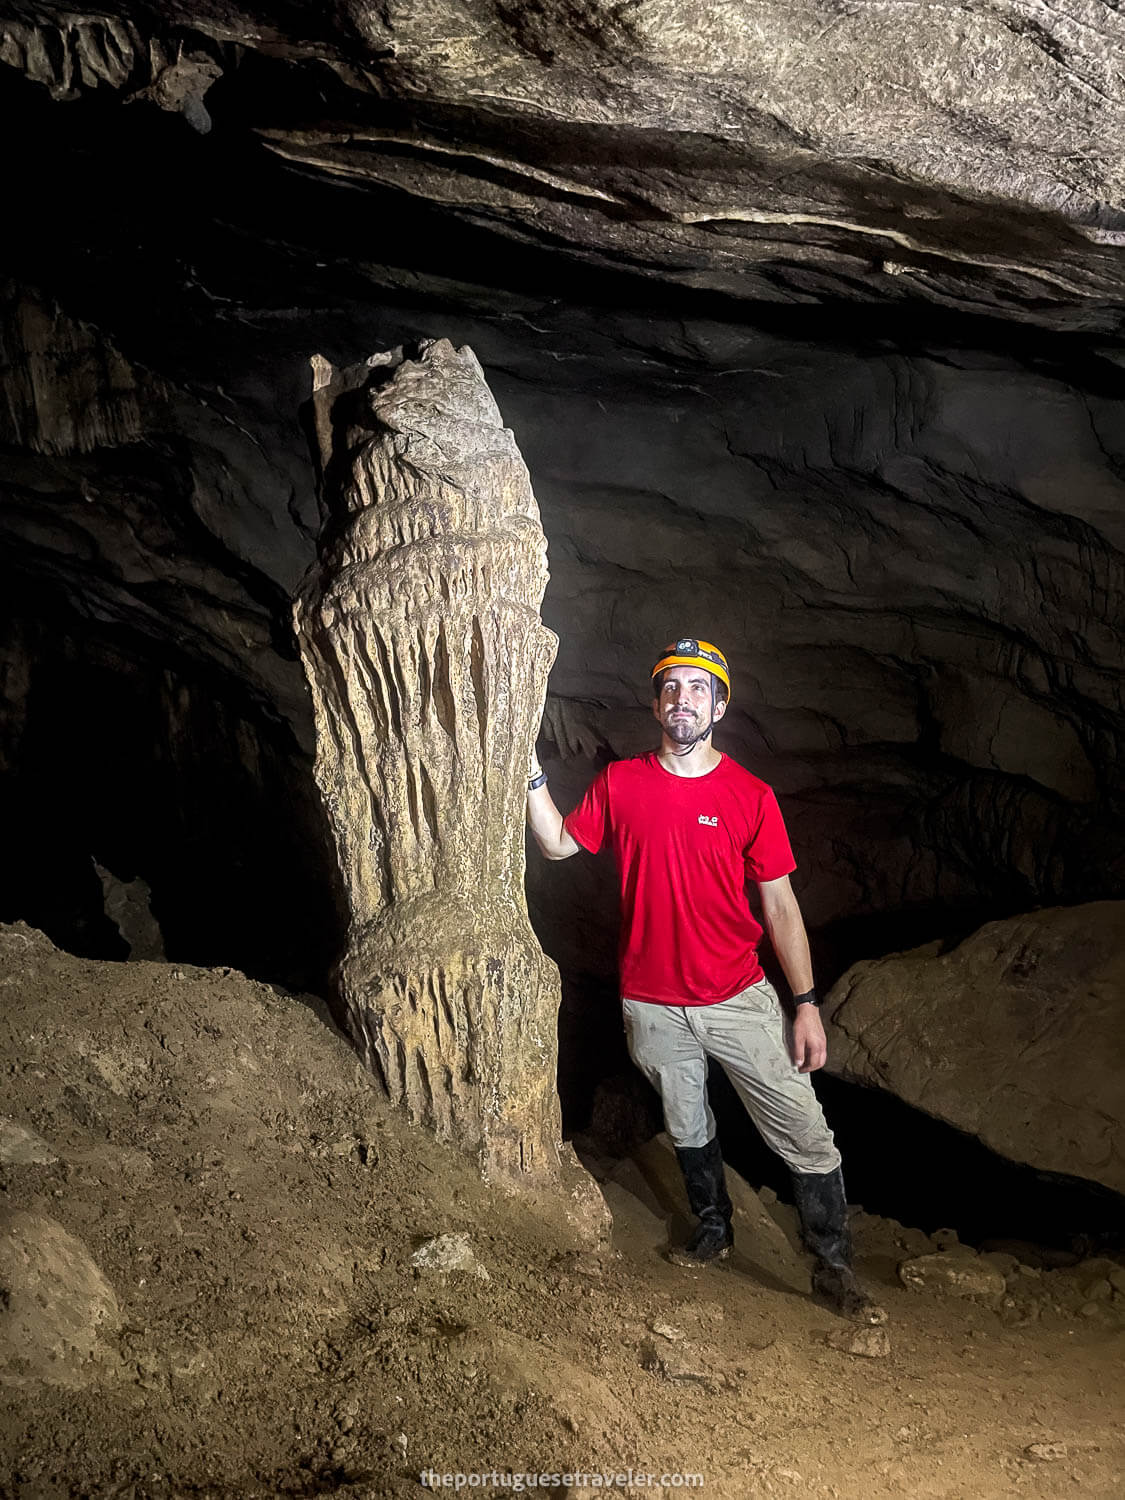 Me at the Neil Armstrongs stalagmite